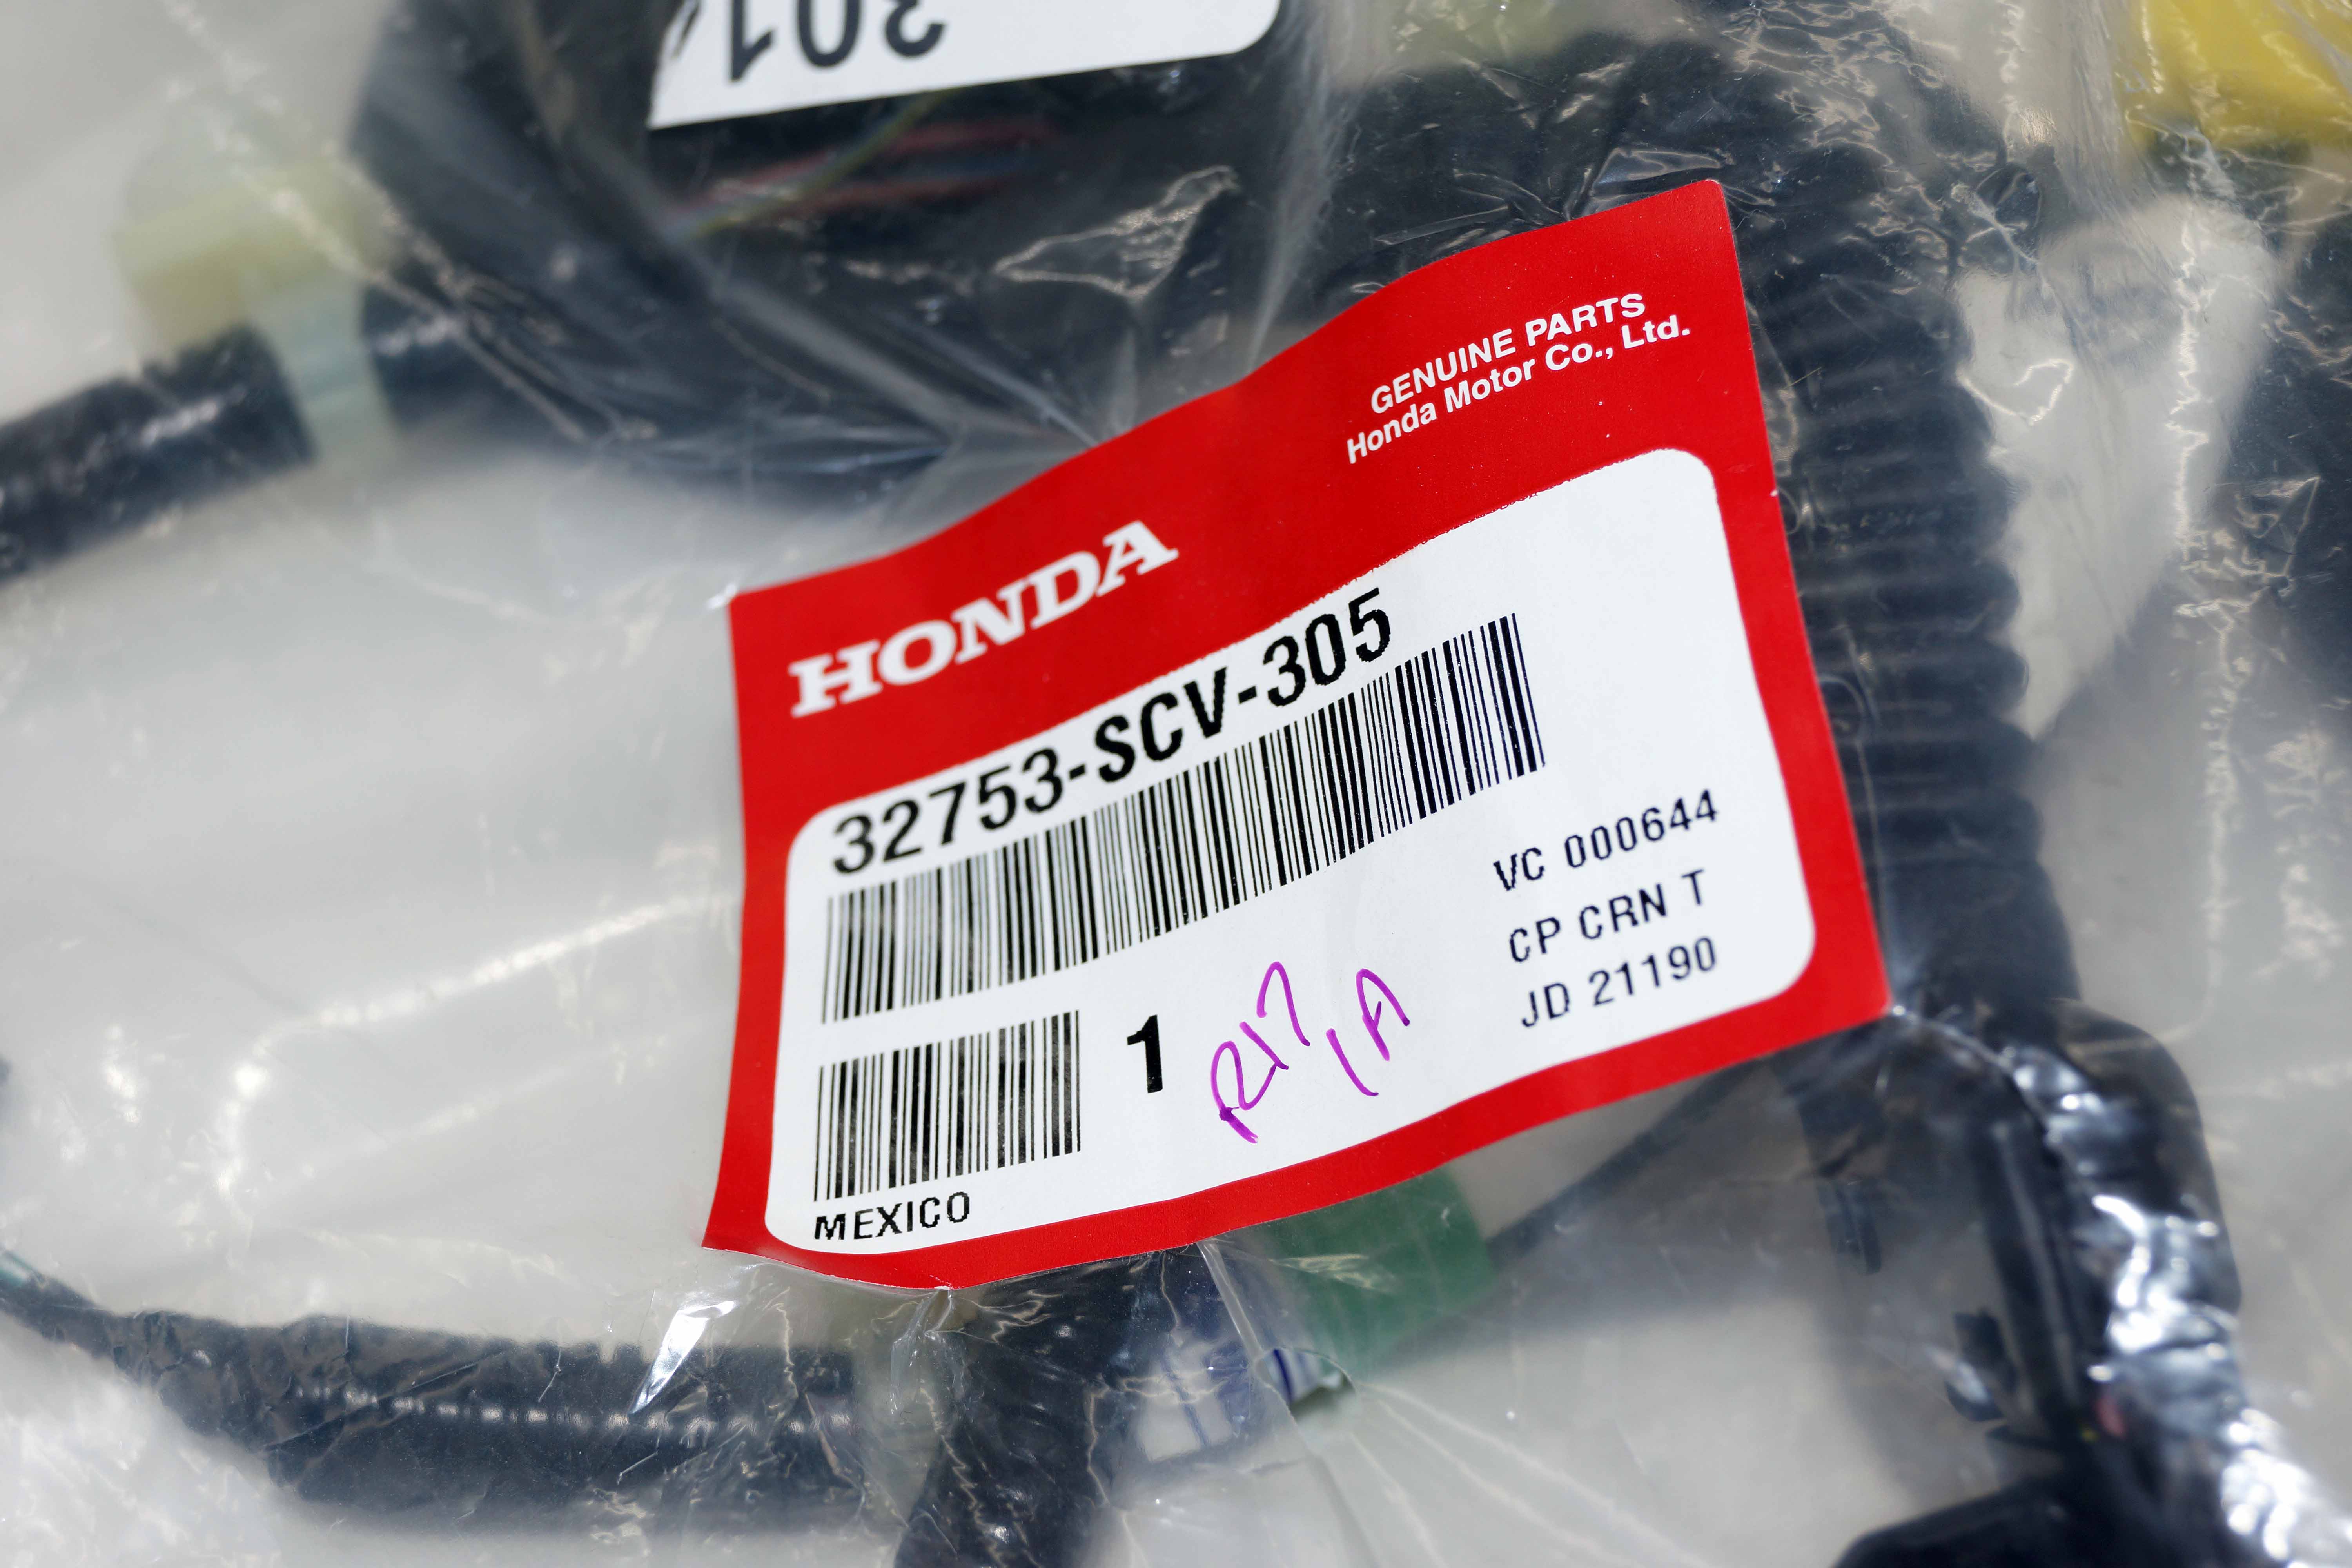 Genuine OEM 32753-SCV-305 Honda Rear Right Door Wire Harness for Element - image 2